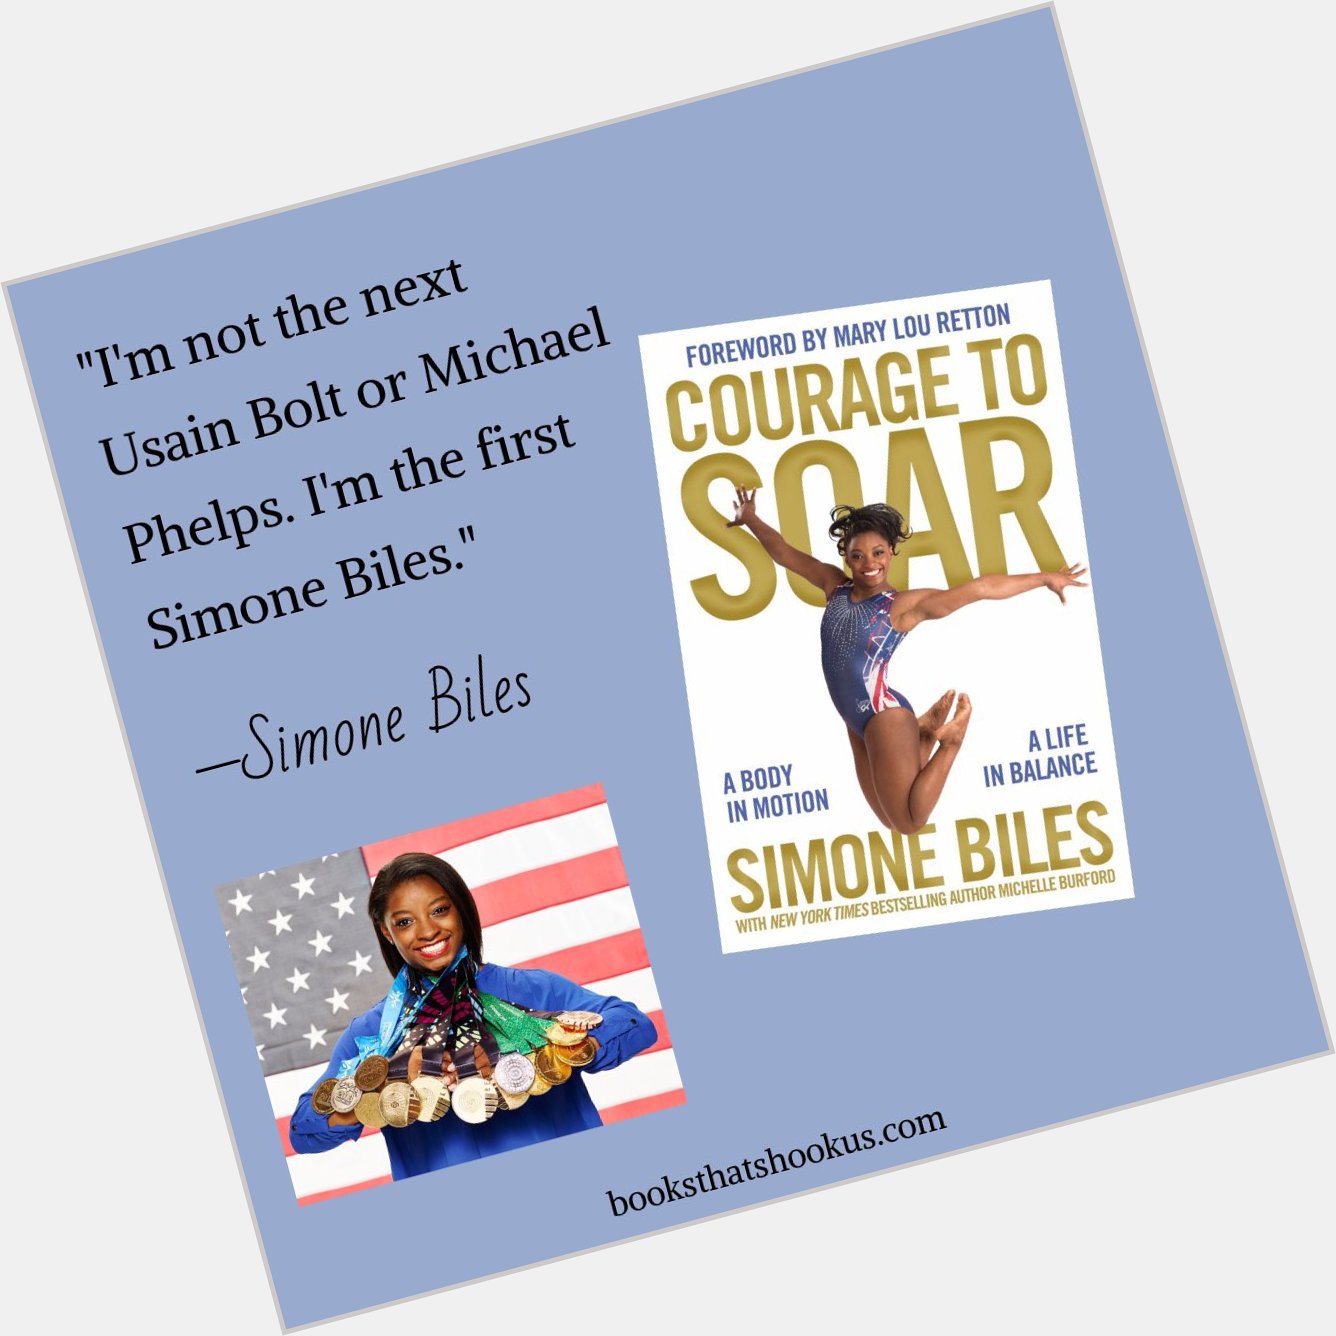 Happy birthday to Simone Biles! We have her memoir on our TBRs. Anyone read it? 